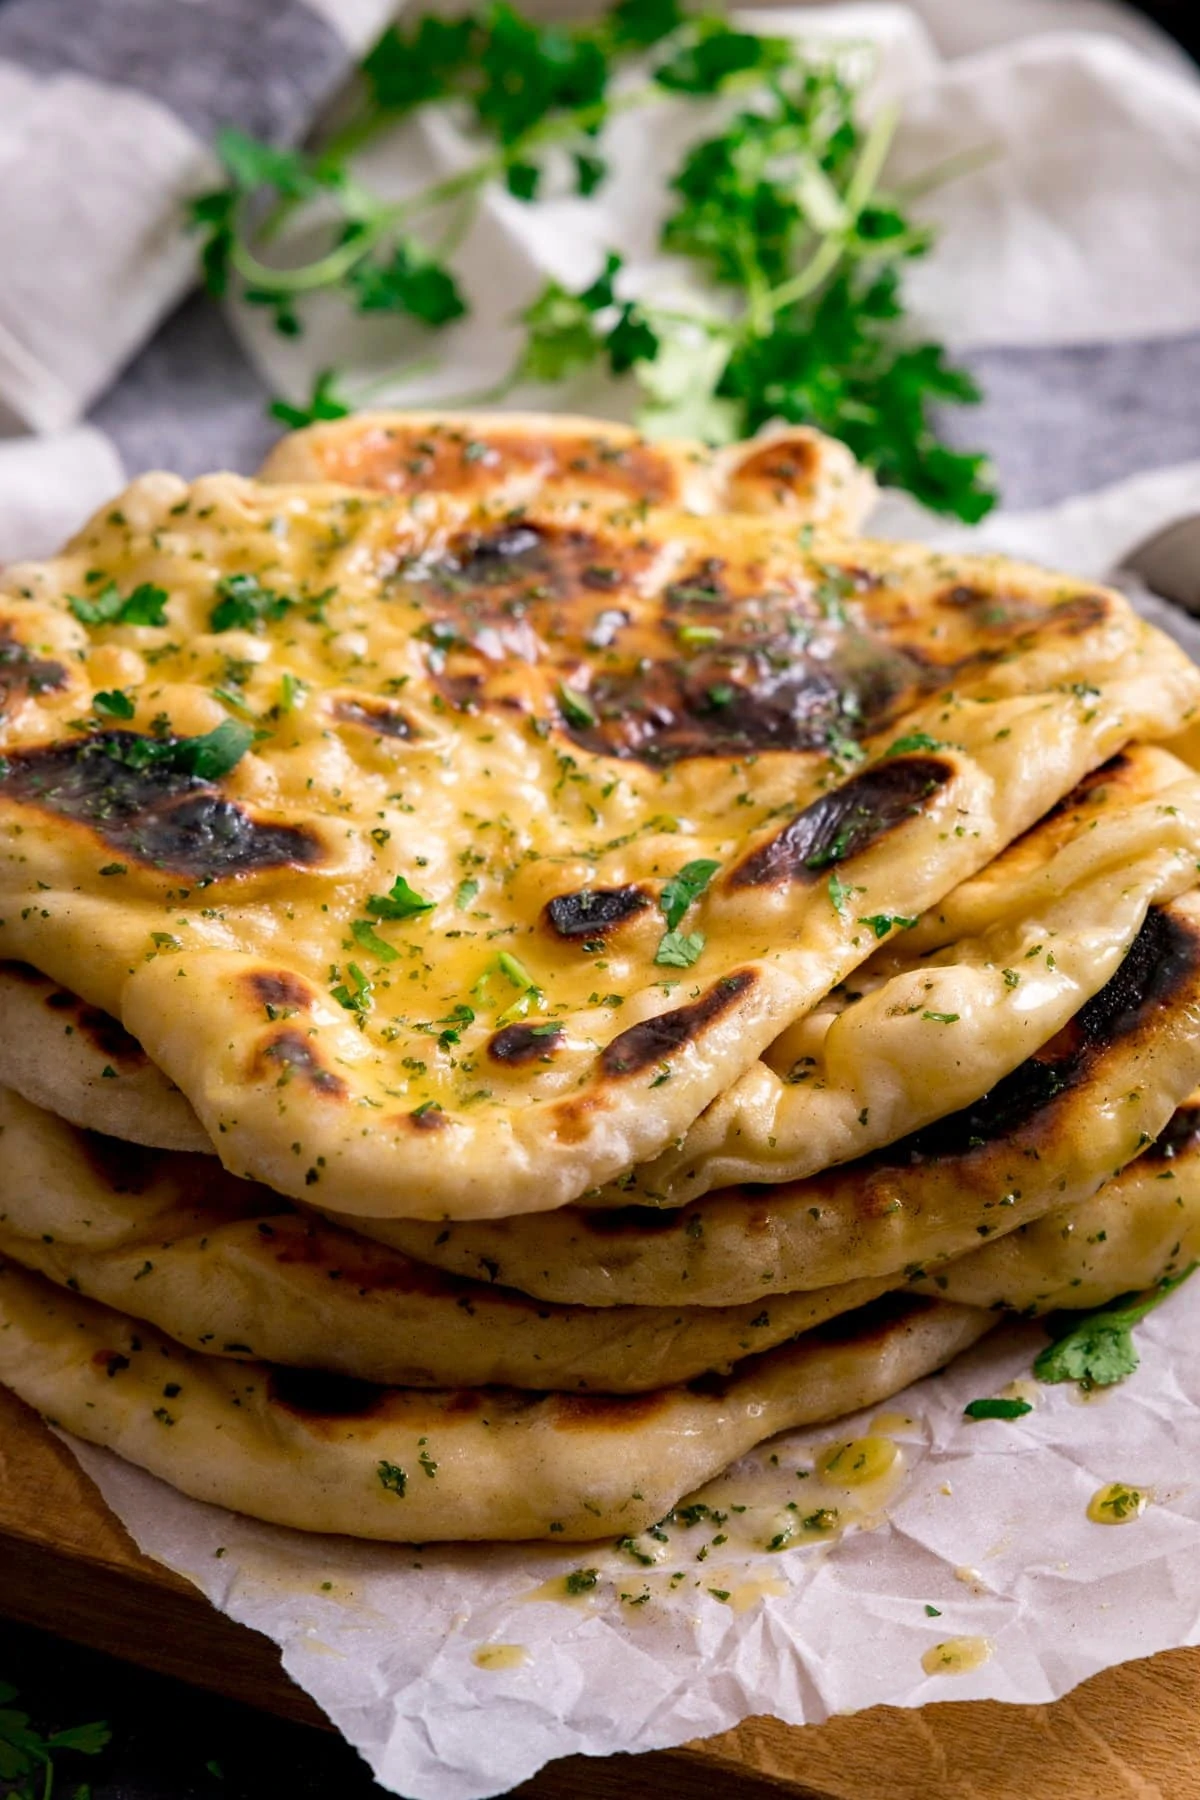 Pile of garlic naan breads on a light background. Fresh herbs in the background.